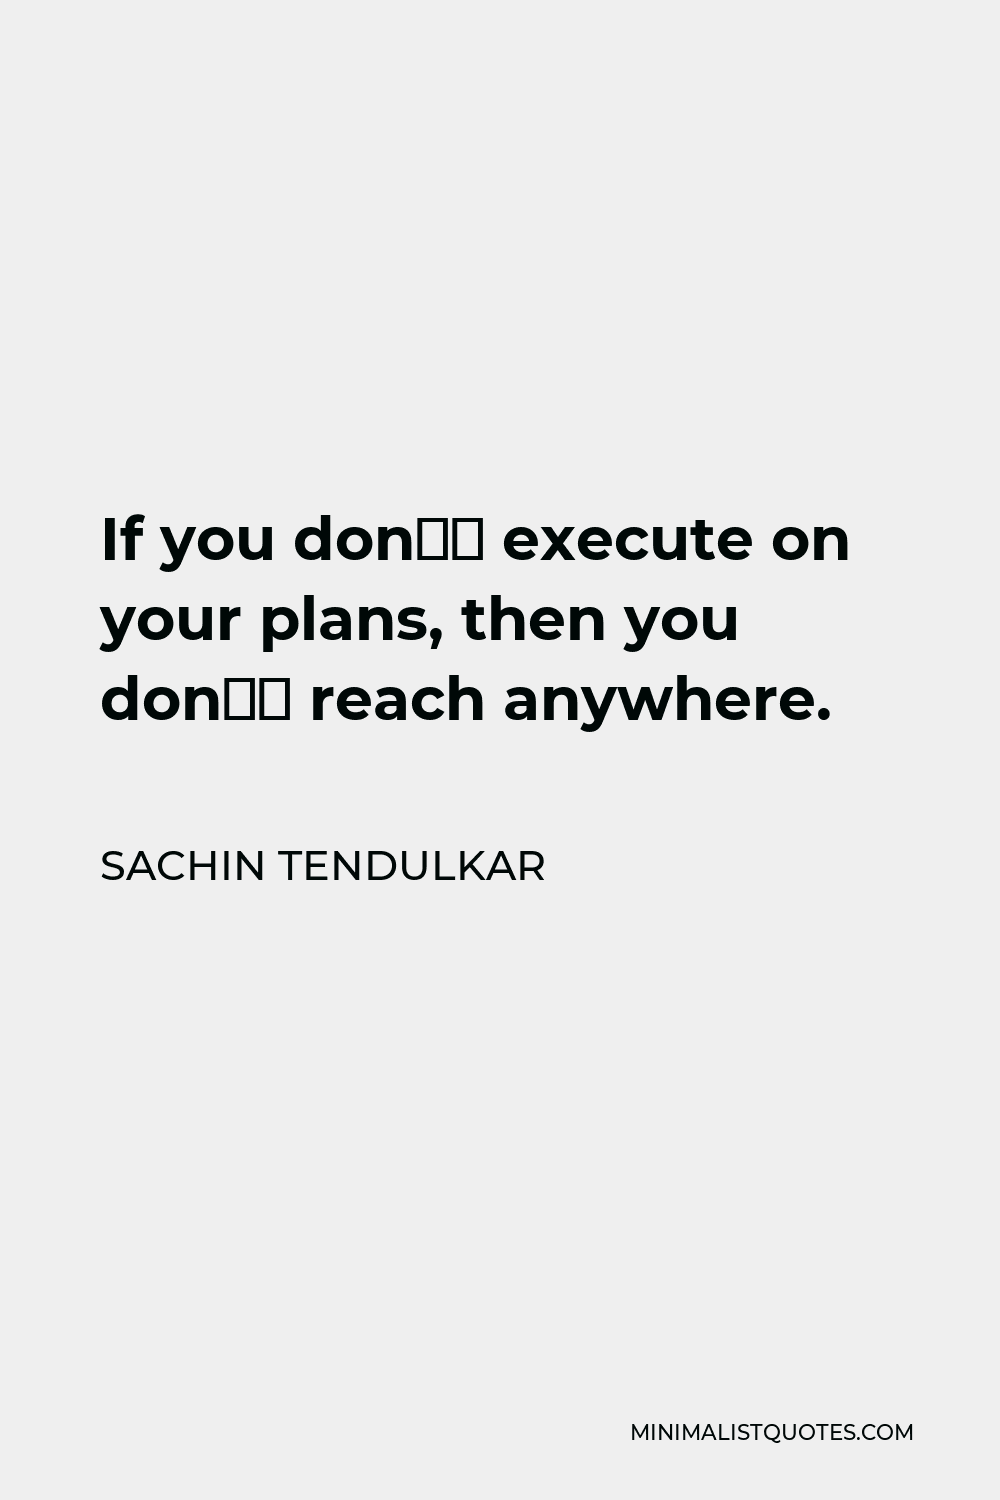 Sachin Tendulkar Quote - If you don’t execute on your plans, then you don’t reach anywhere.